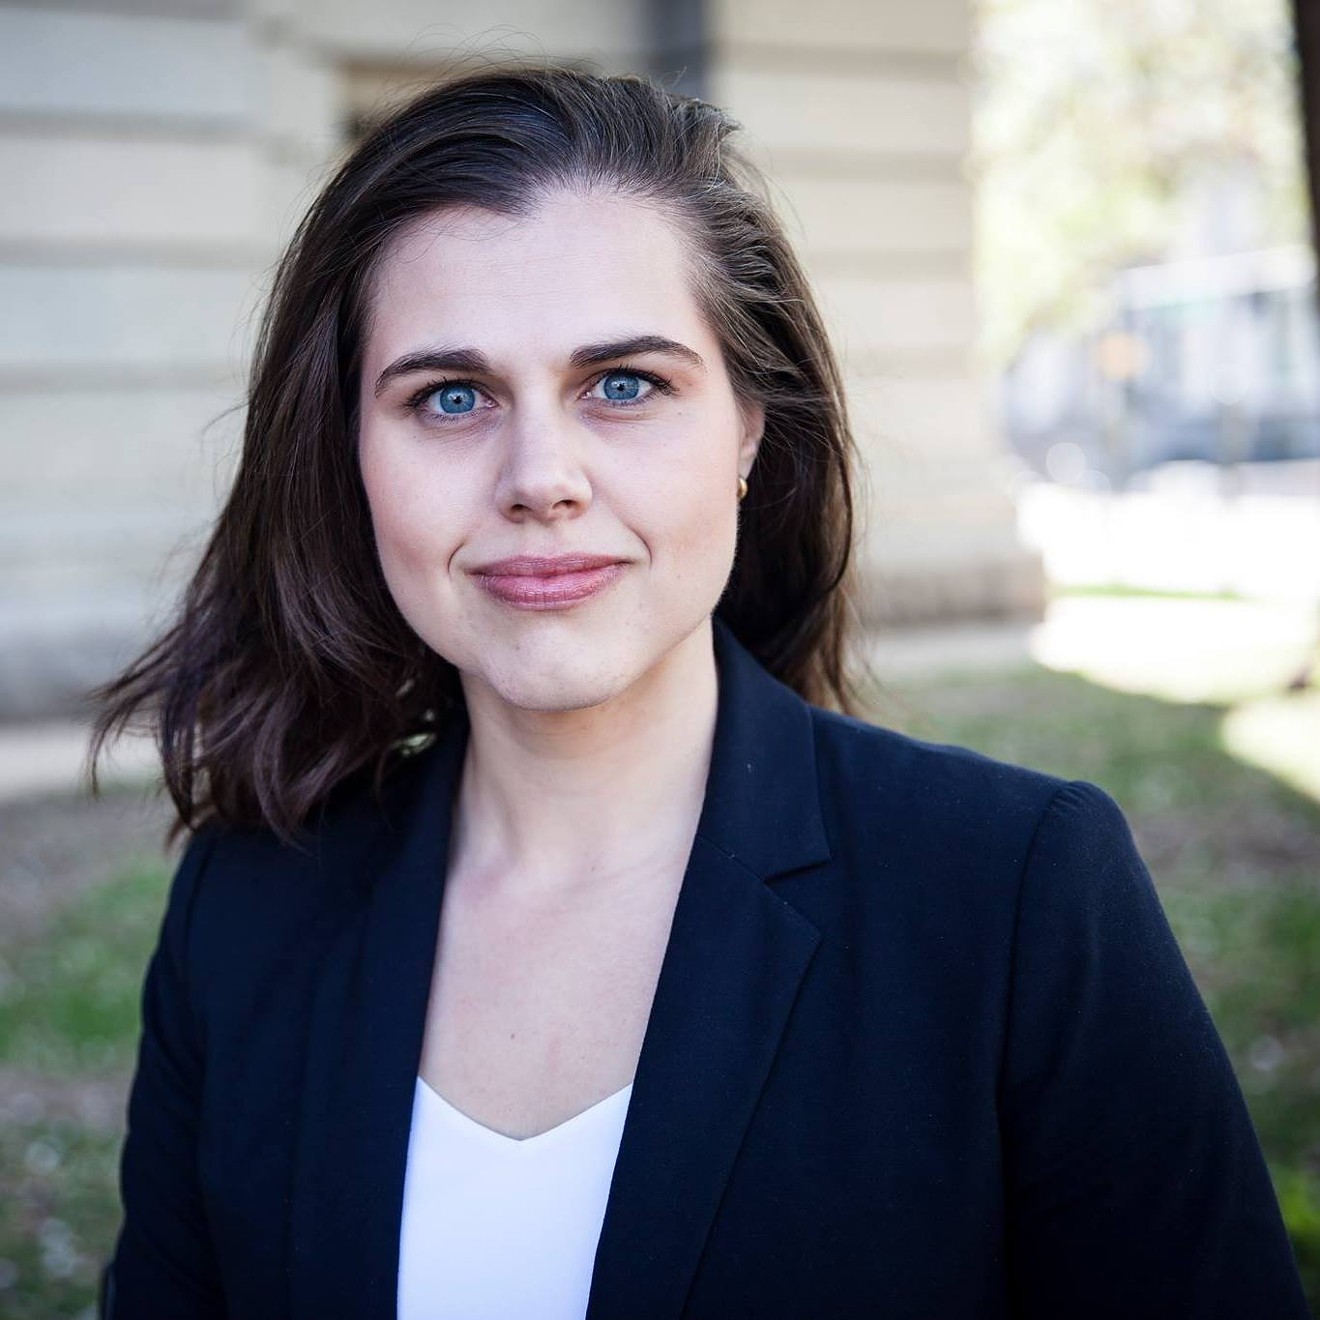 Jena Griswold, the only female statewide candidate in the 2018 general election, is running to unseat Republican incumbent Wayne Williams for Colorado secretary of state.